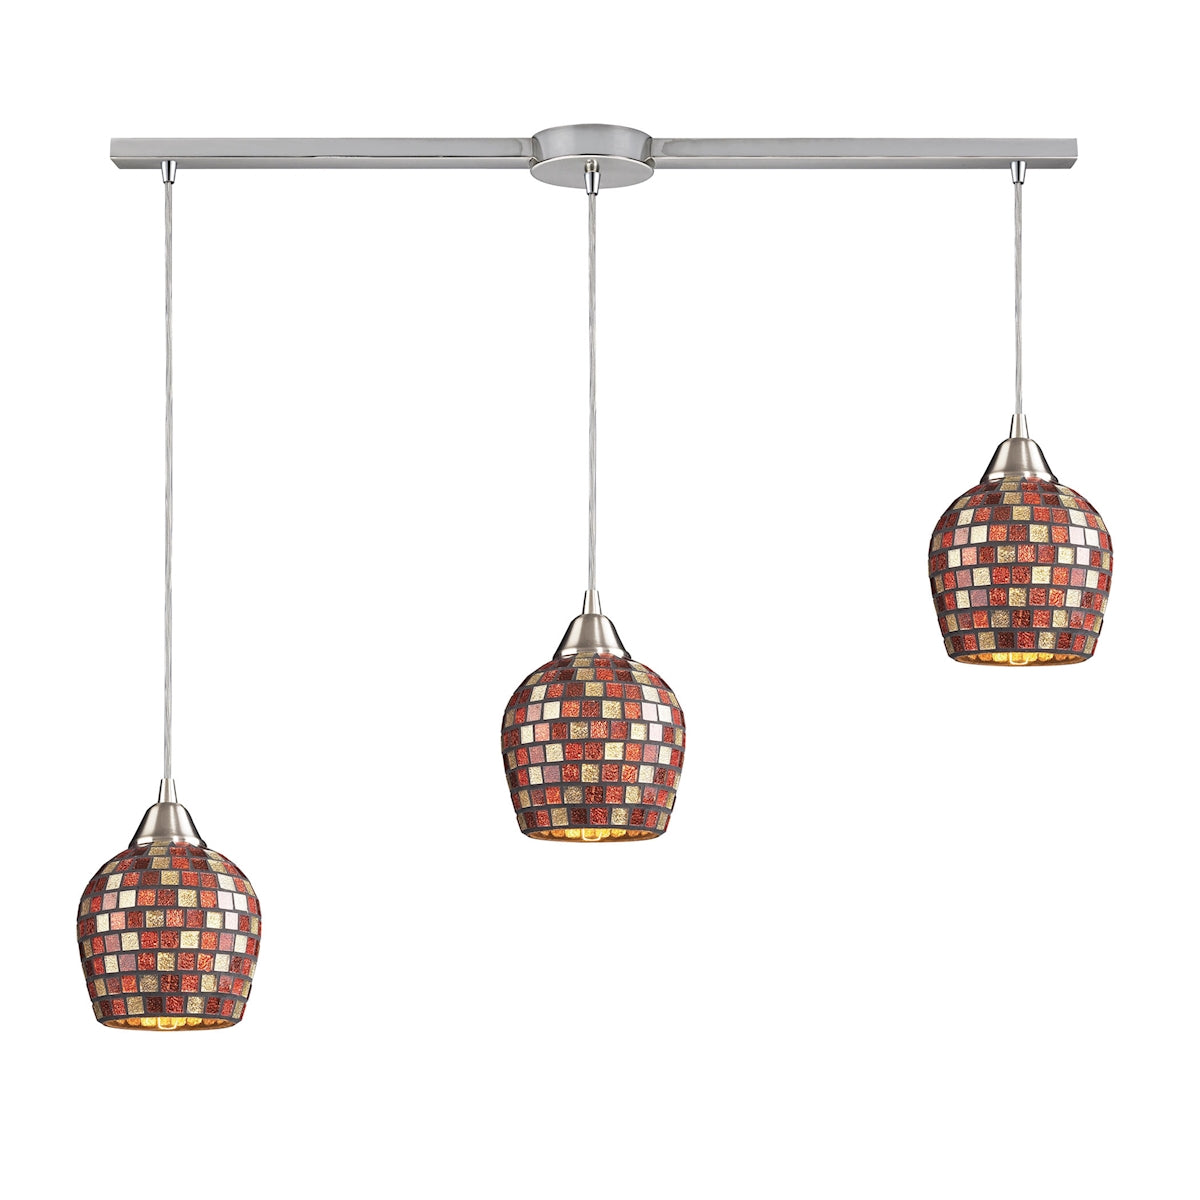 ELK Lighting 528-3L-MLT Fusion 3-Light Linear Pendant Fixture in Satin Nickel with Multi-colored Mosaic Glass